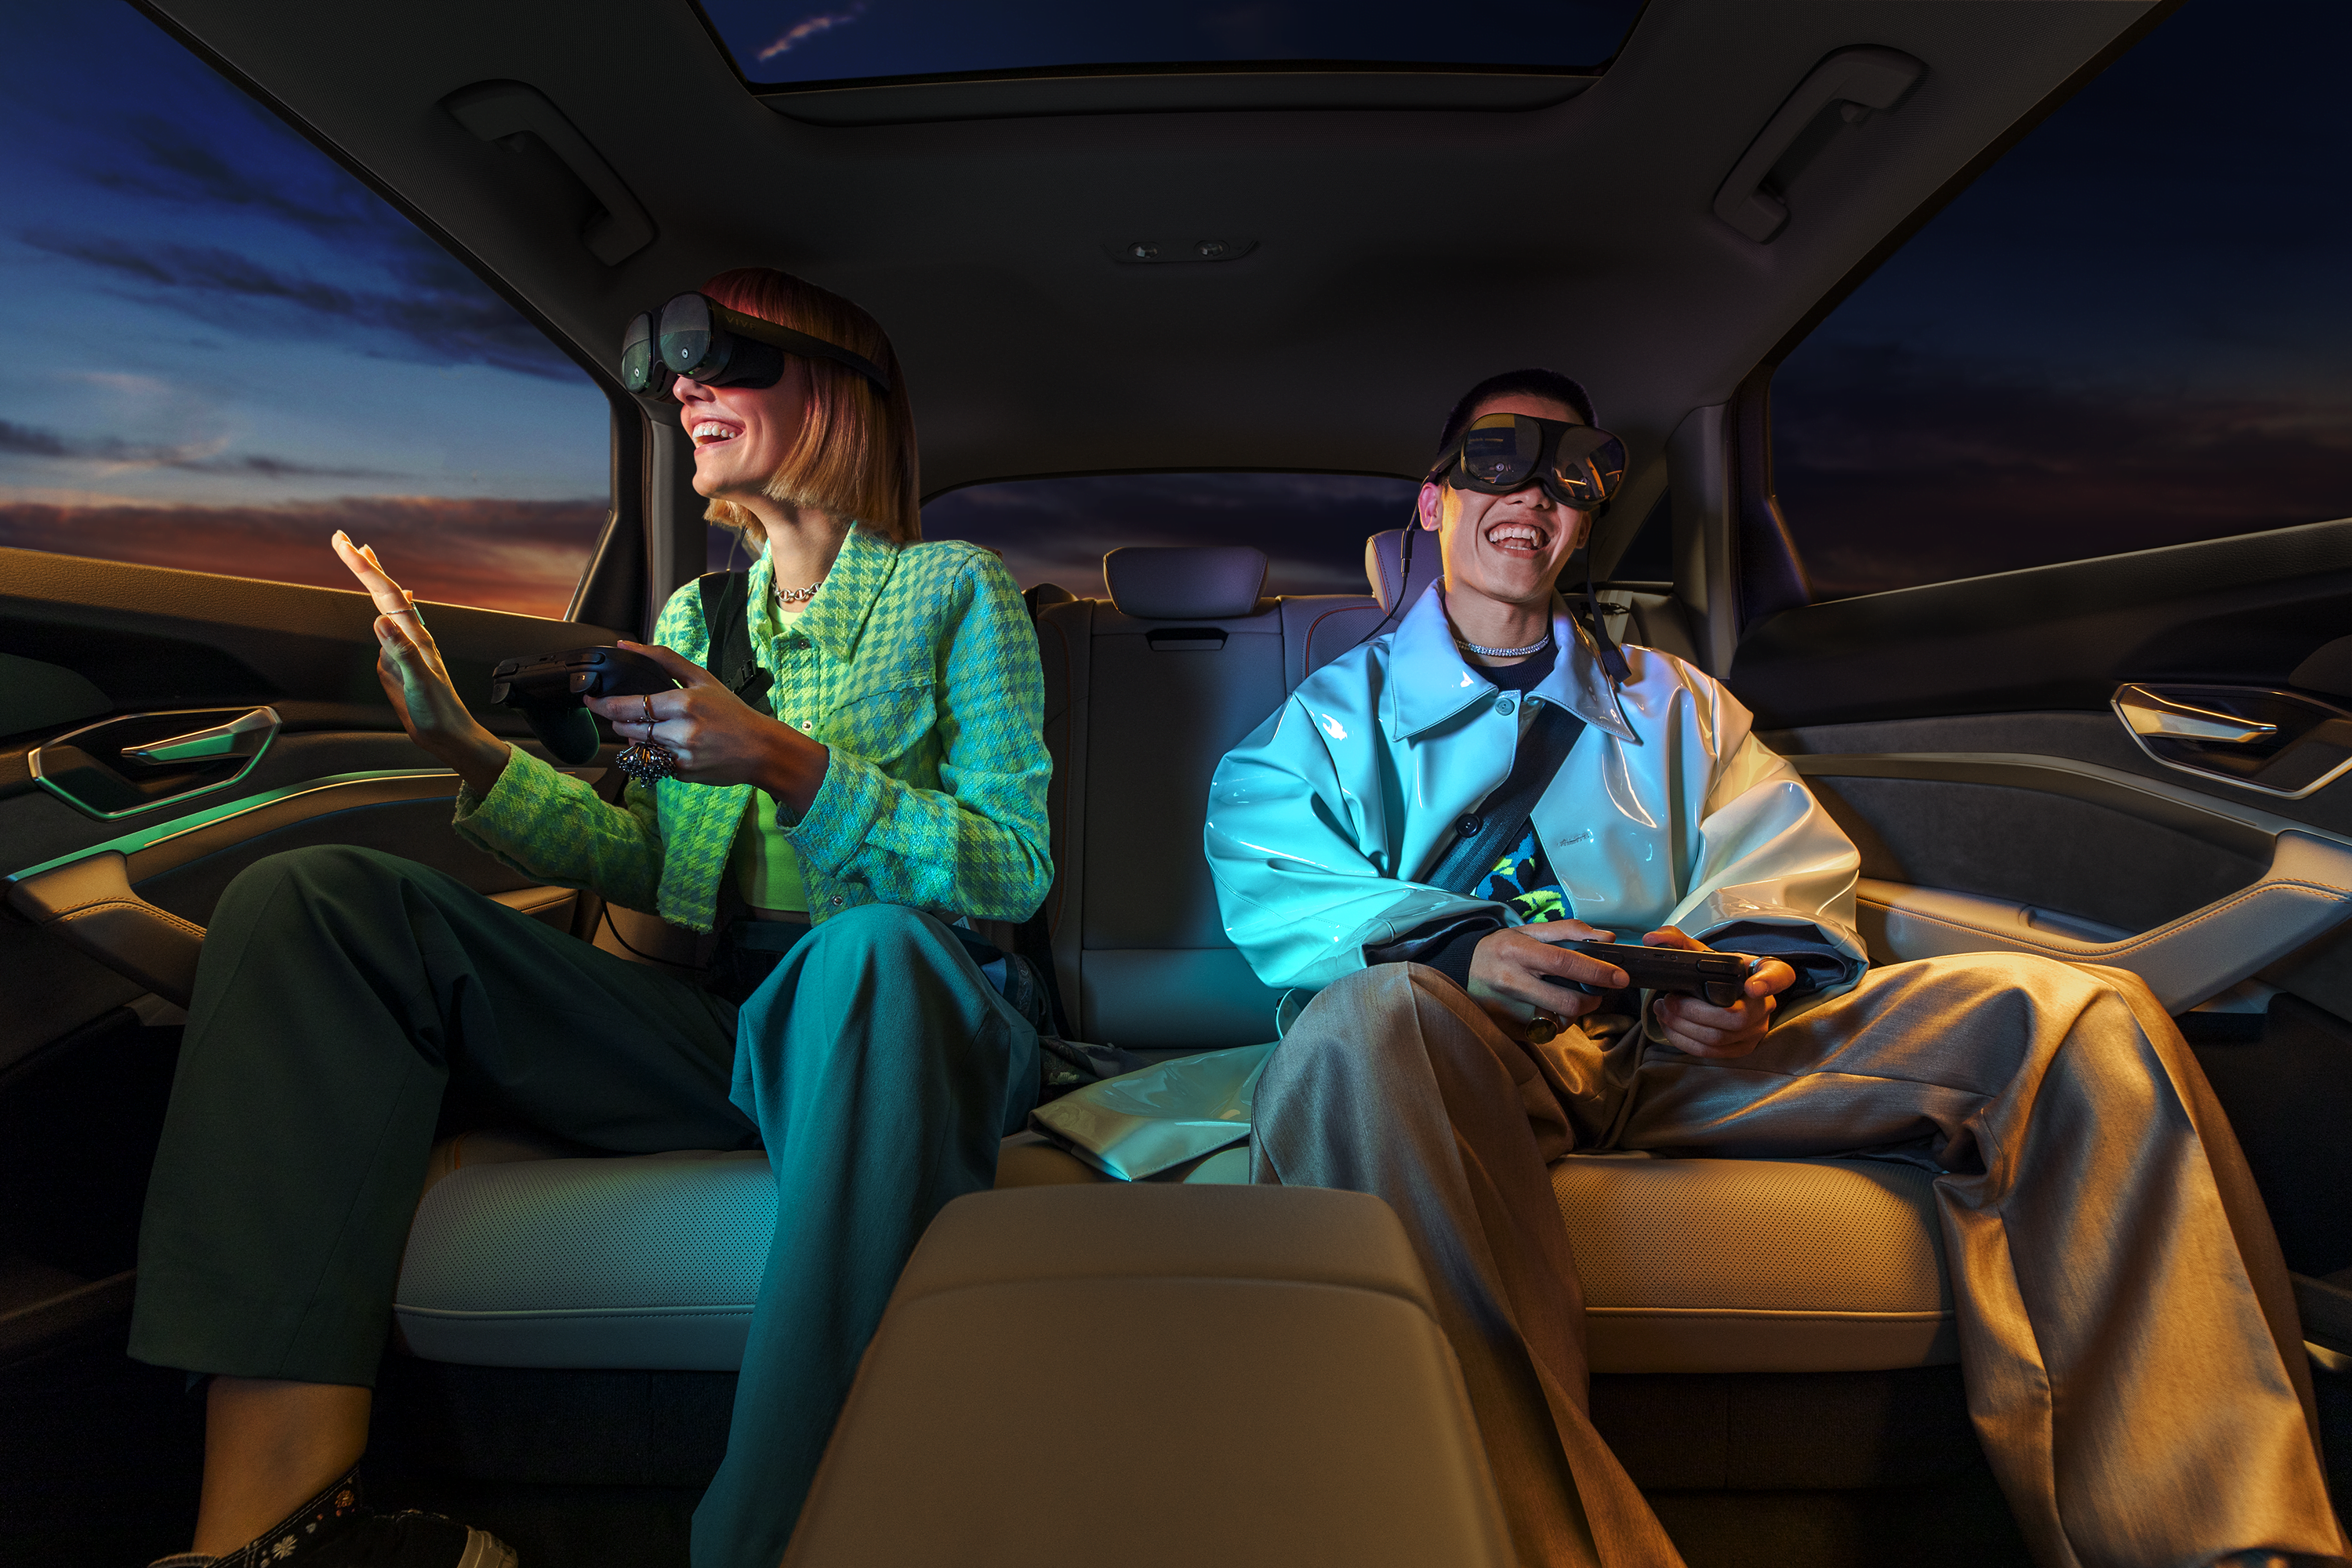 Holoride Retrofit brings rear-seat VR to all vehicles